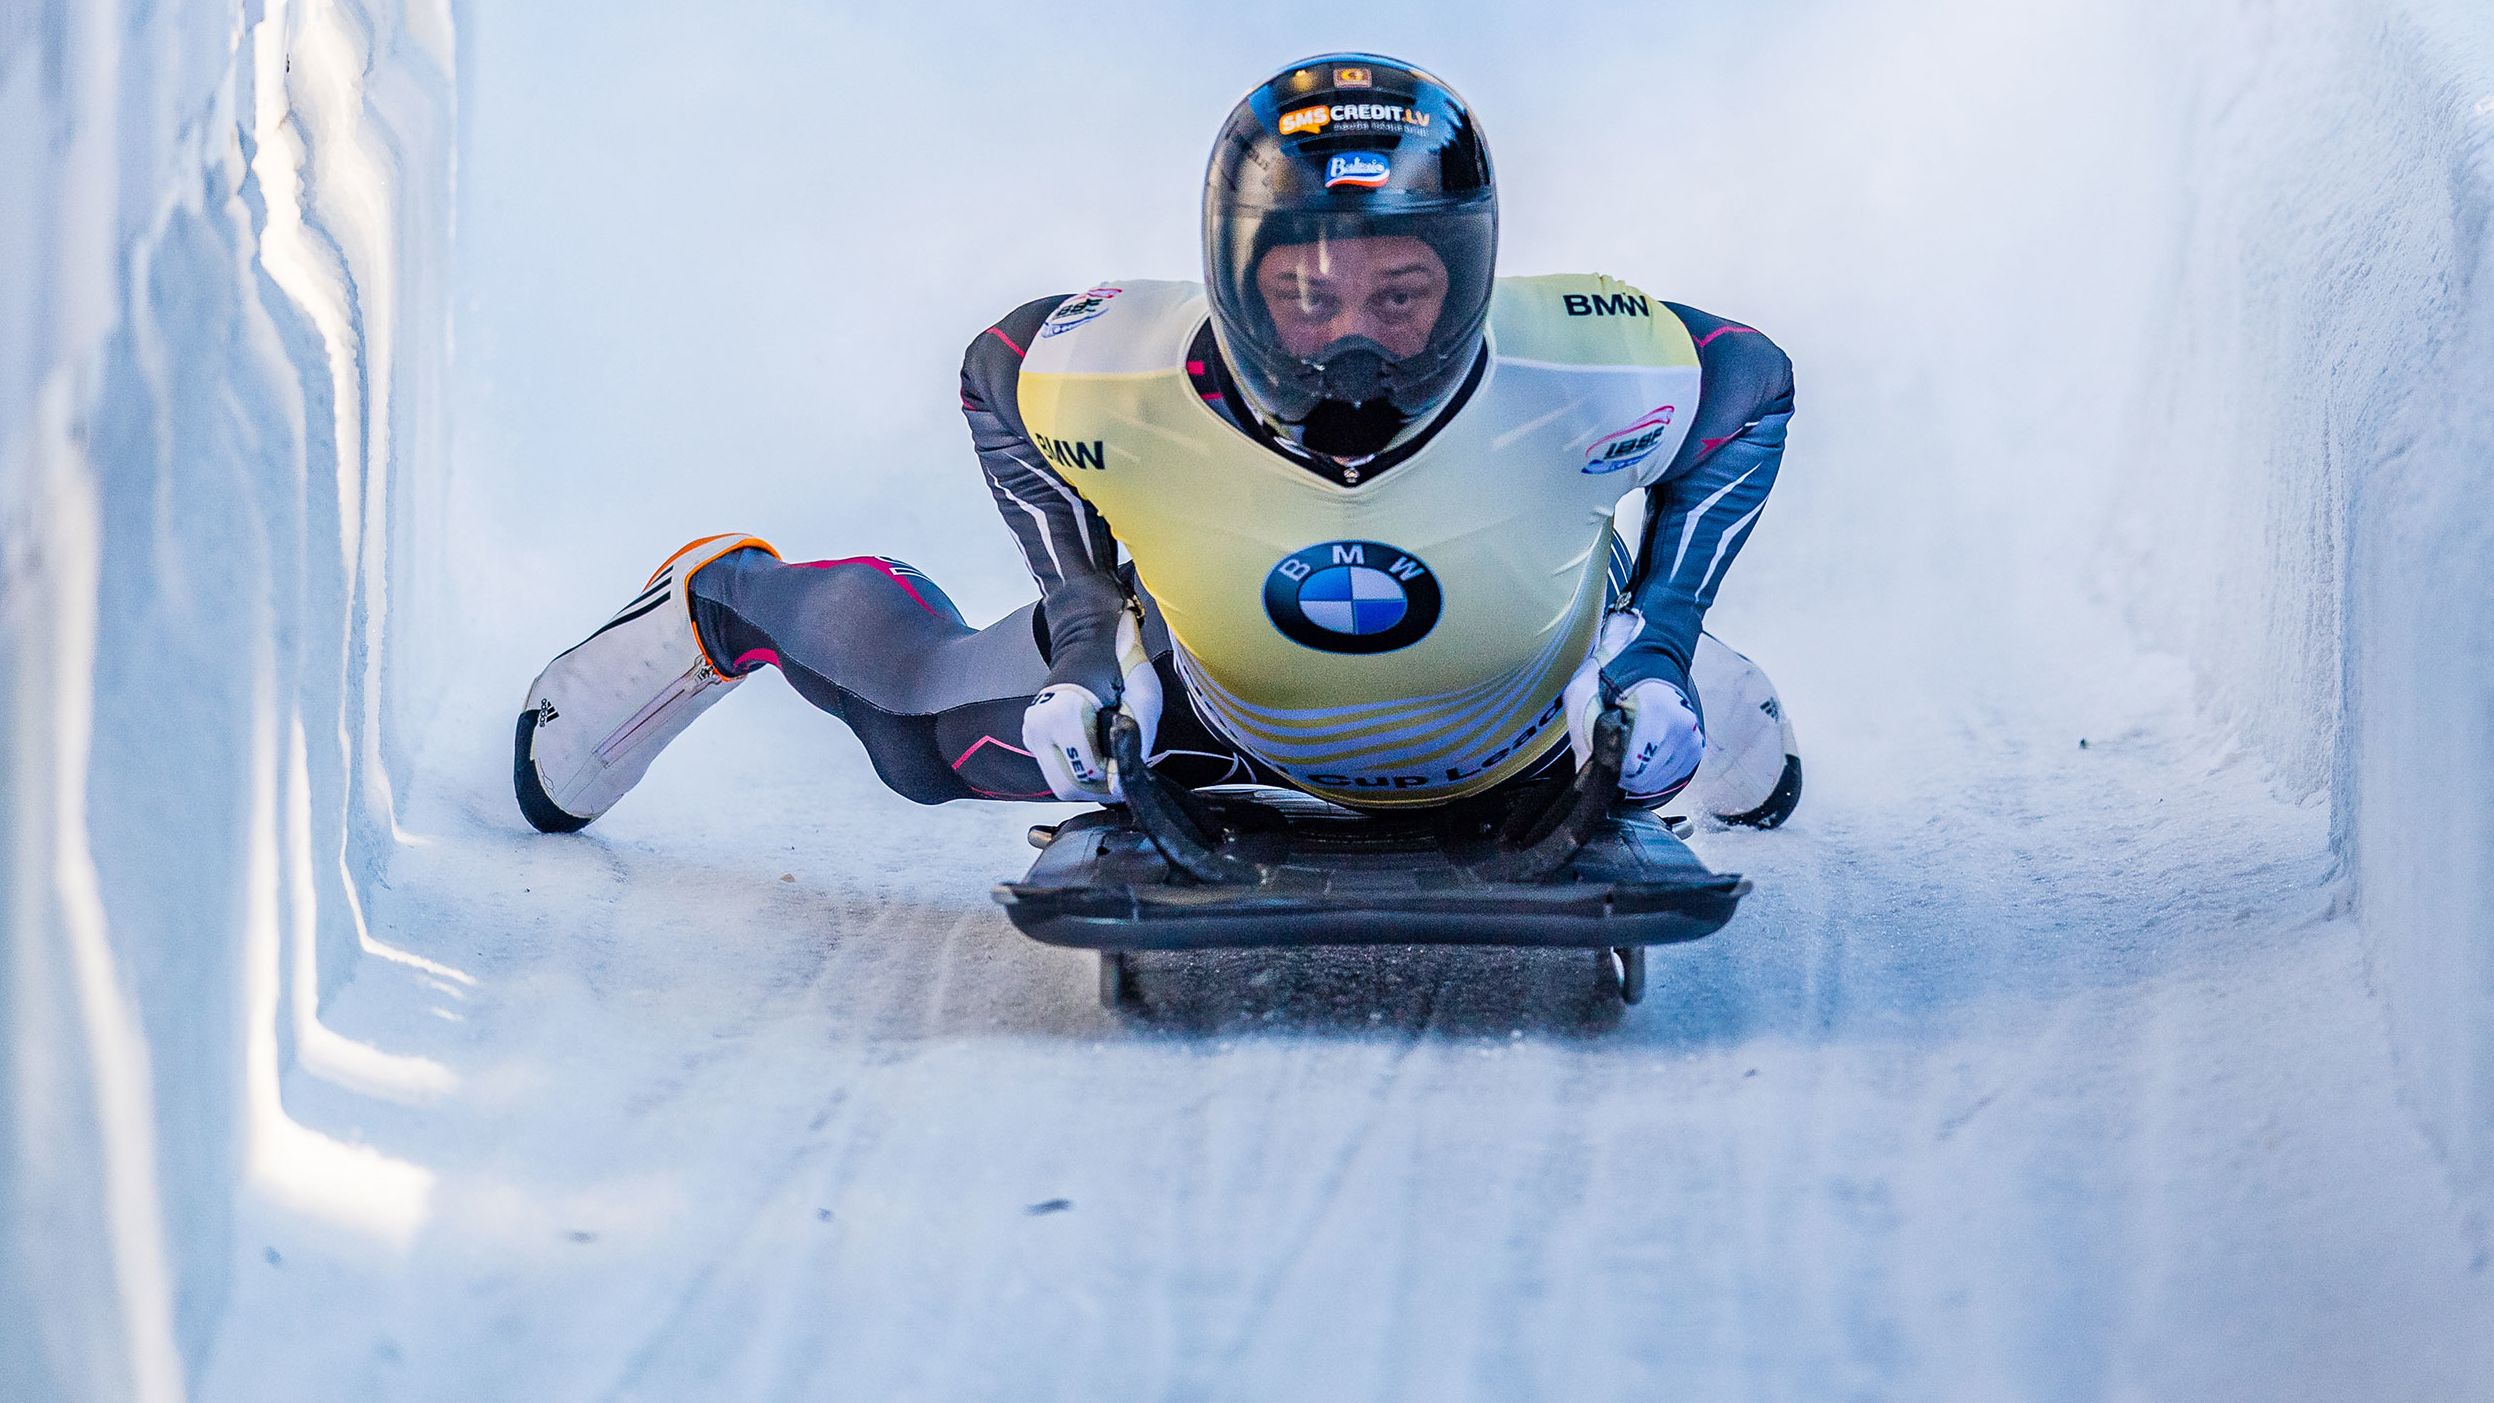 <strong>Martins Dukurs (Latvia):</strong> Dukurs, 37, has been a dominant force in skeleton for years, winning six world championships and 11 World Cup titles, including the last three. But the one thing that has eluded him has been Olympic gold. He won silver in 2010 and 2014 before finishing fourth in 2018.